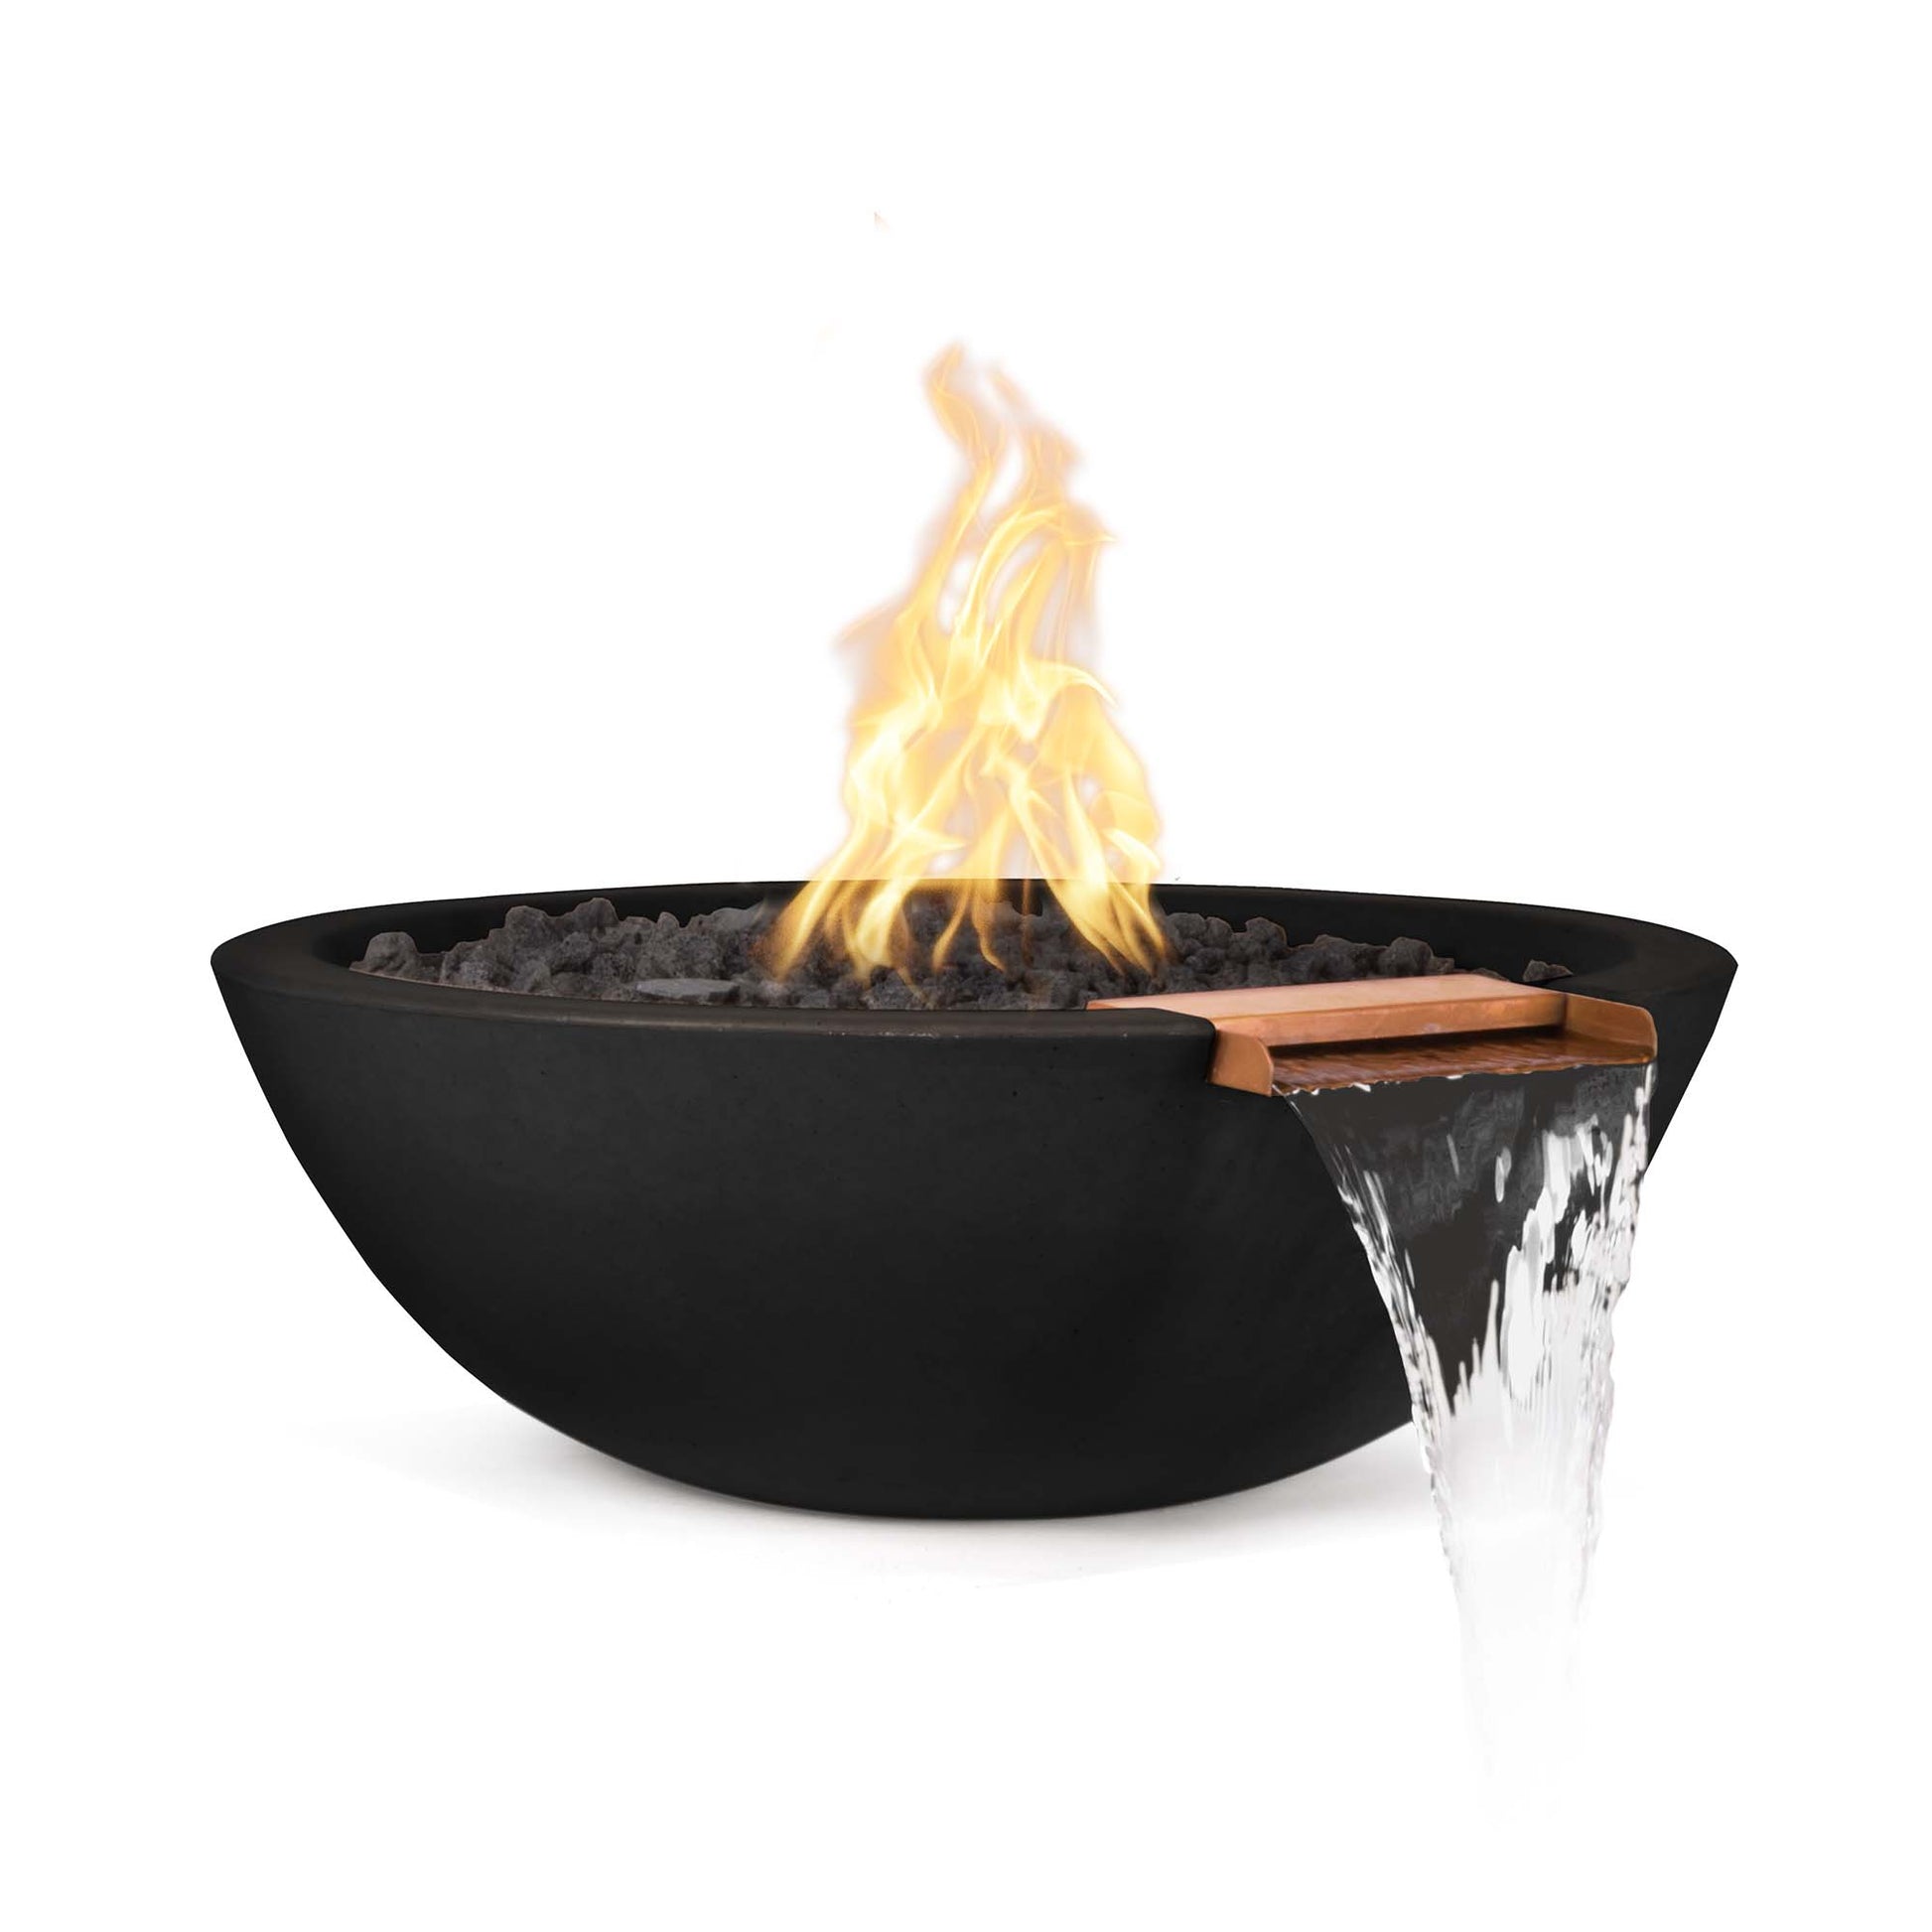 The Outdoor Plus Round Sedona 27" Metallic Copper GFRC Concrete Natural Gas Fire & Water Bowl with Match Lit with Flame Sense Ignition